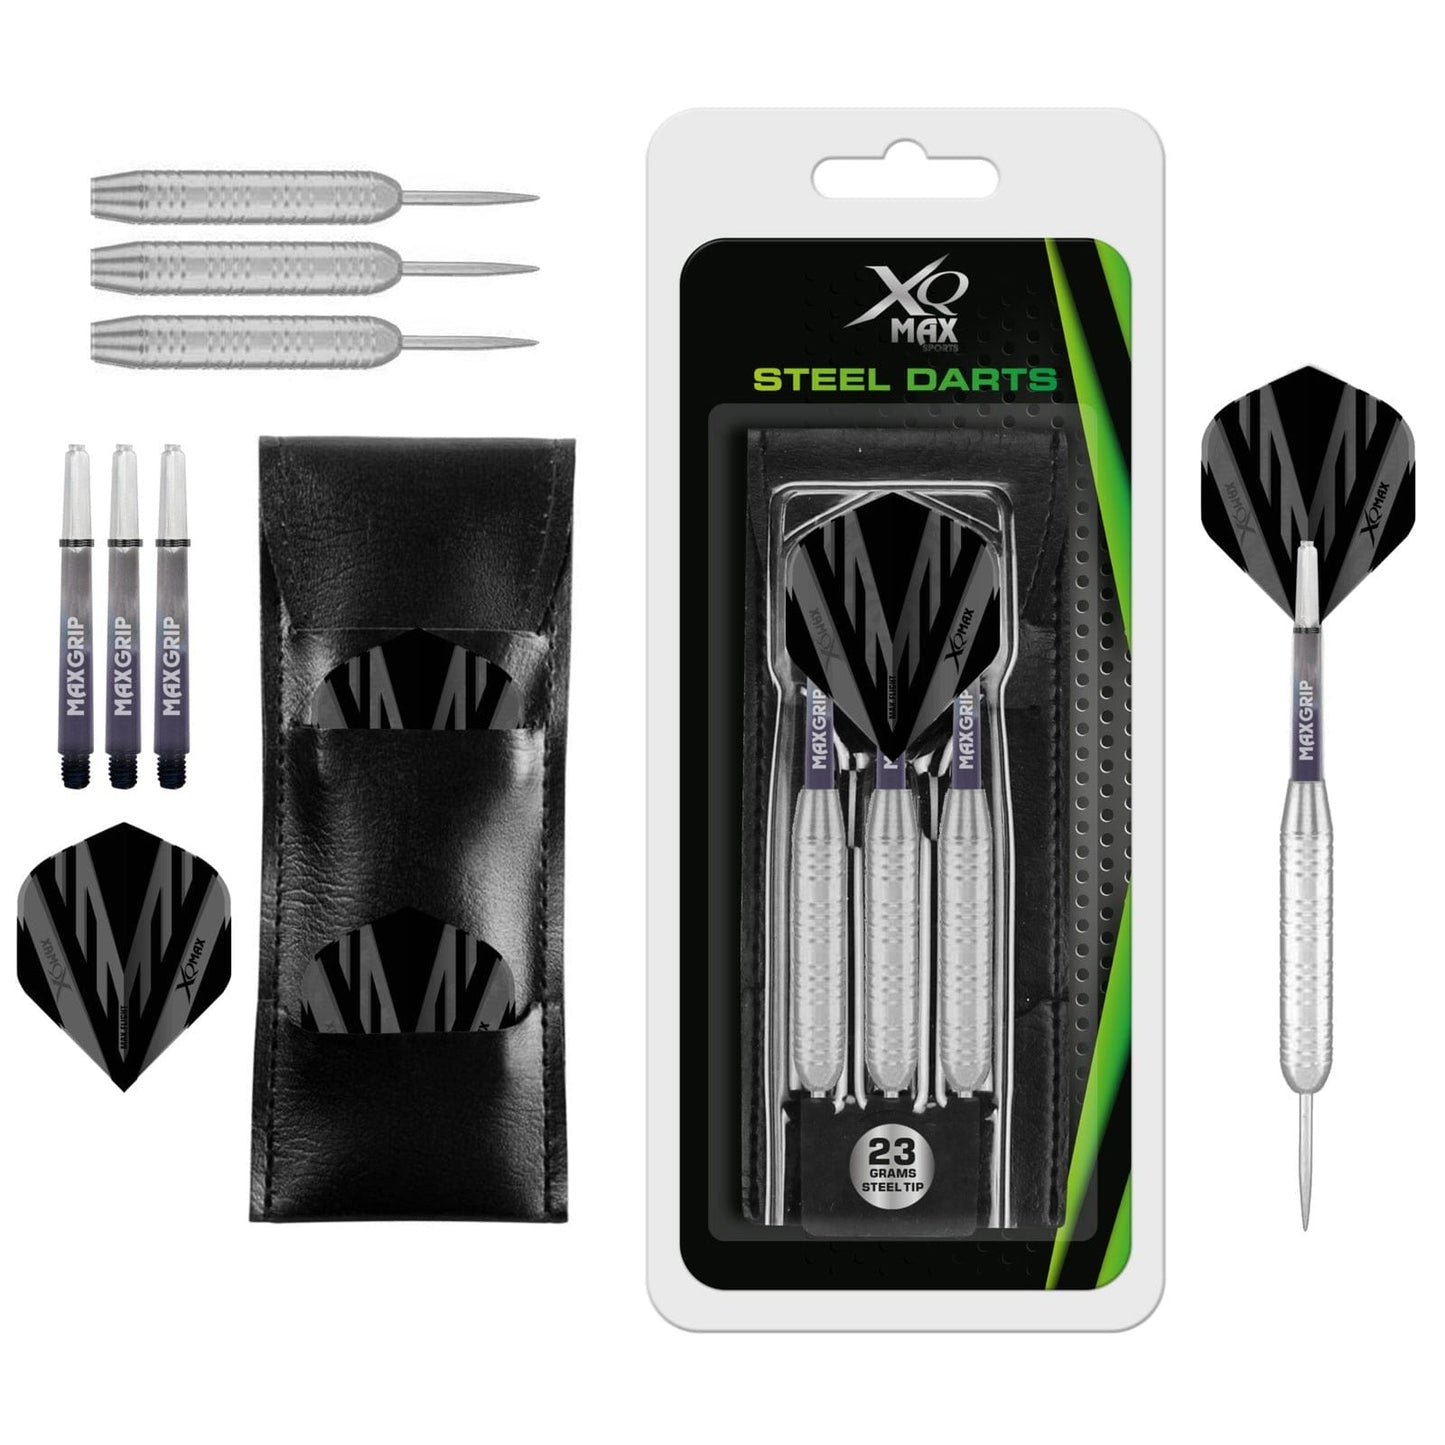 XQMax Steel Tip Darts - Silver Coated Steel - includes Case - 23g 23g